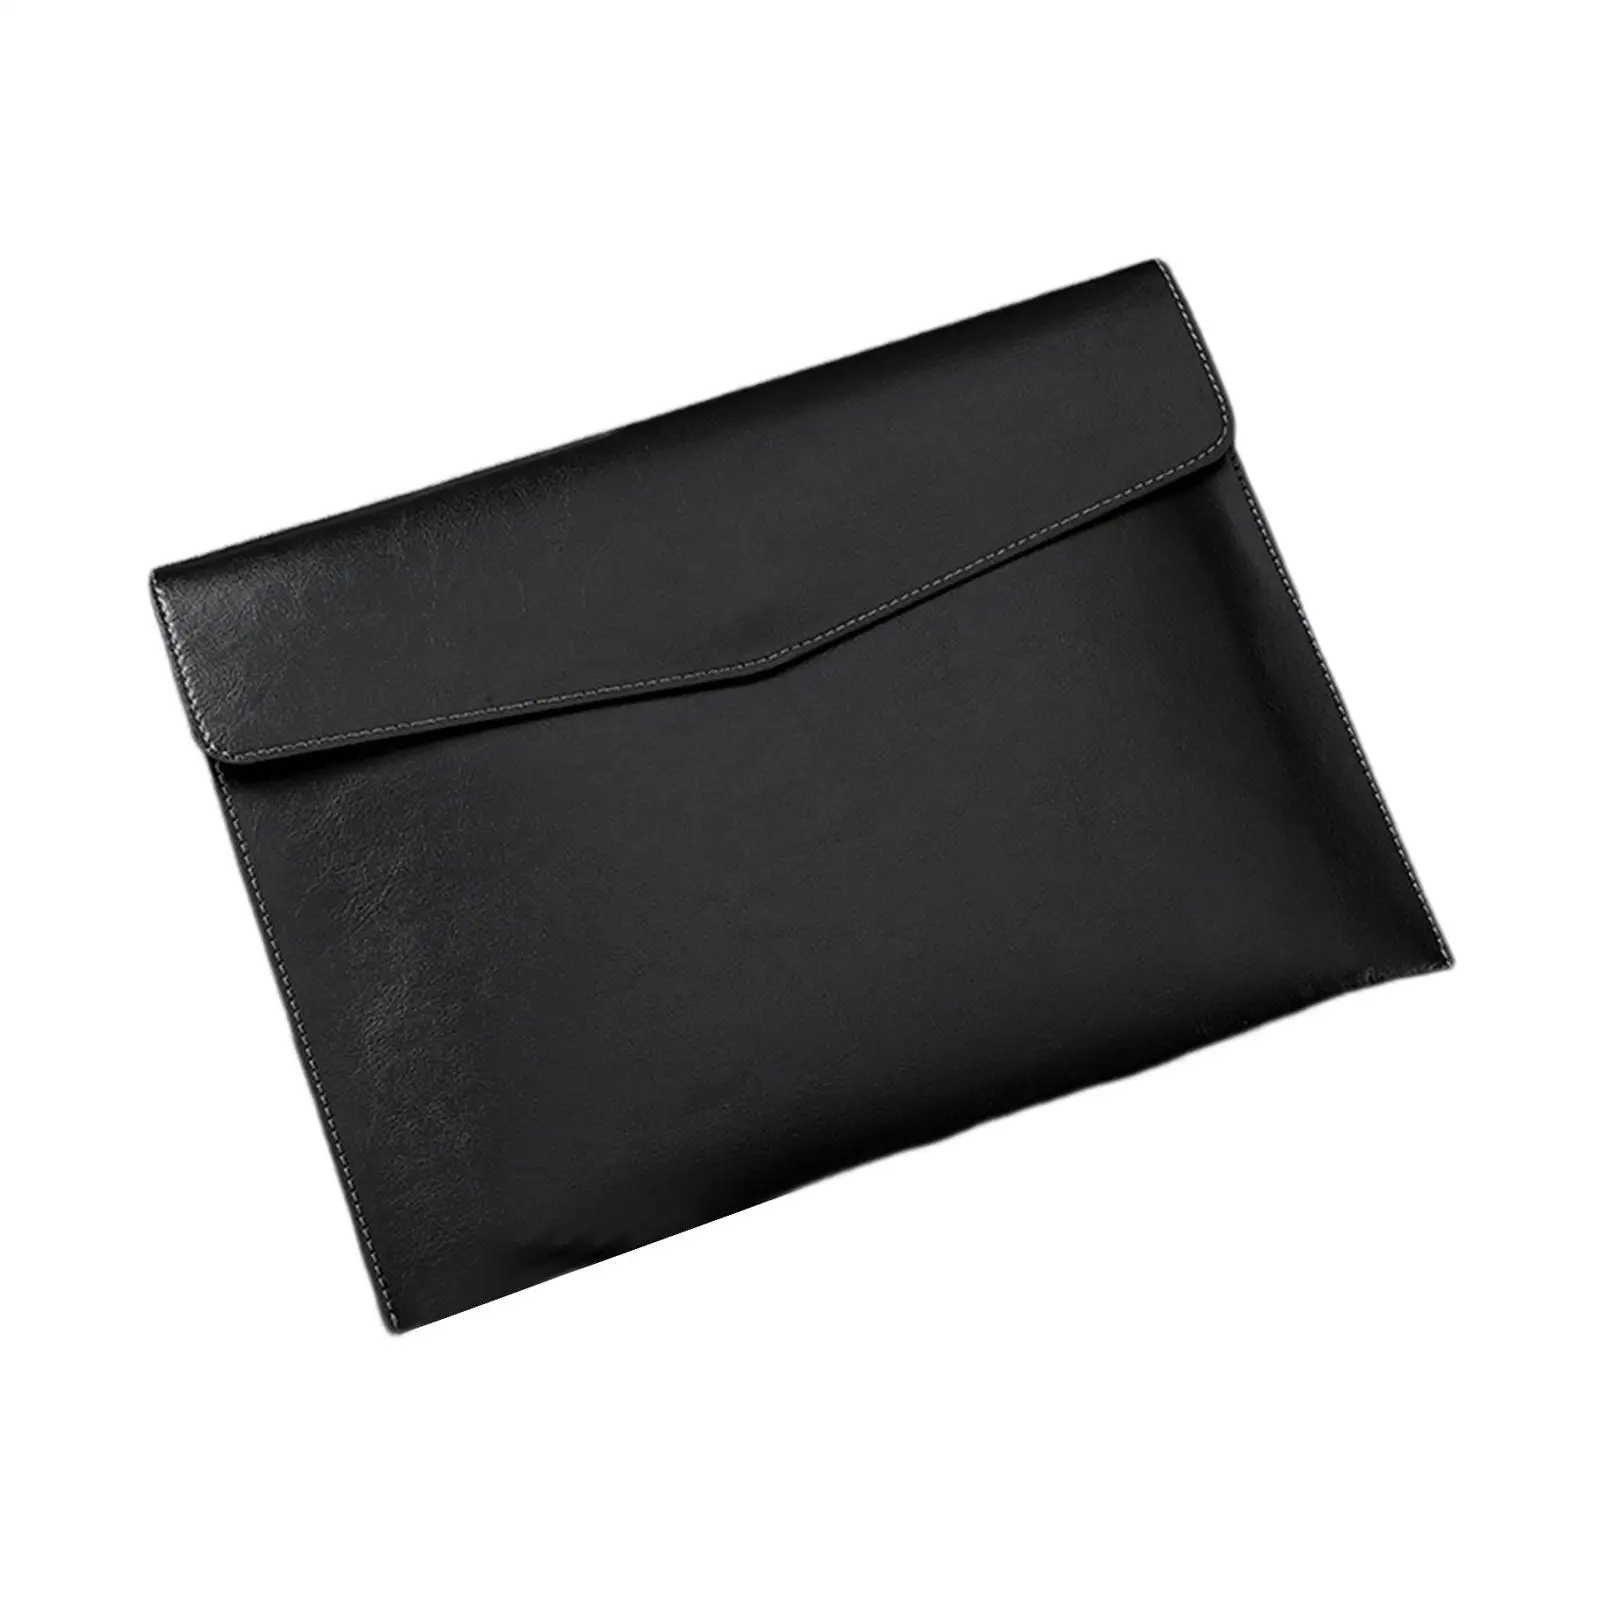 PU Leather Folder Multifunctional with Pen Slots Portfolio Document Holder A4 Business Briefcase for Business Commercial Travel